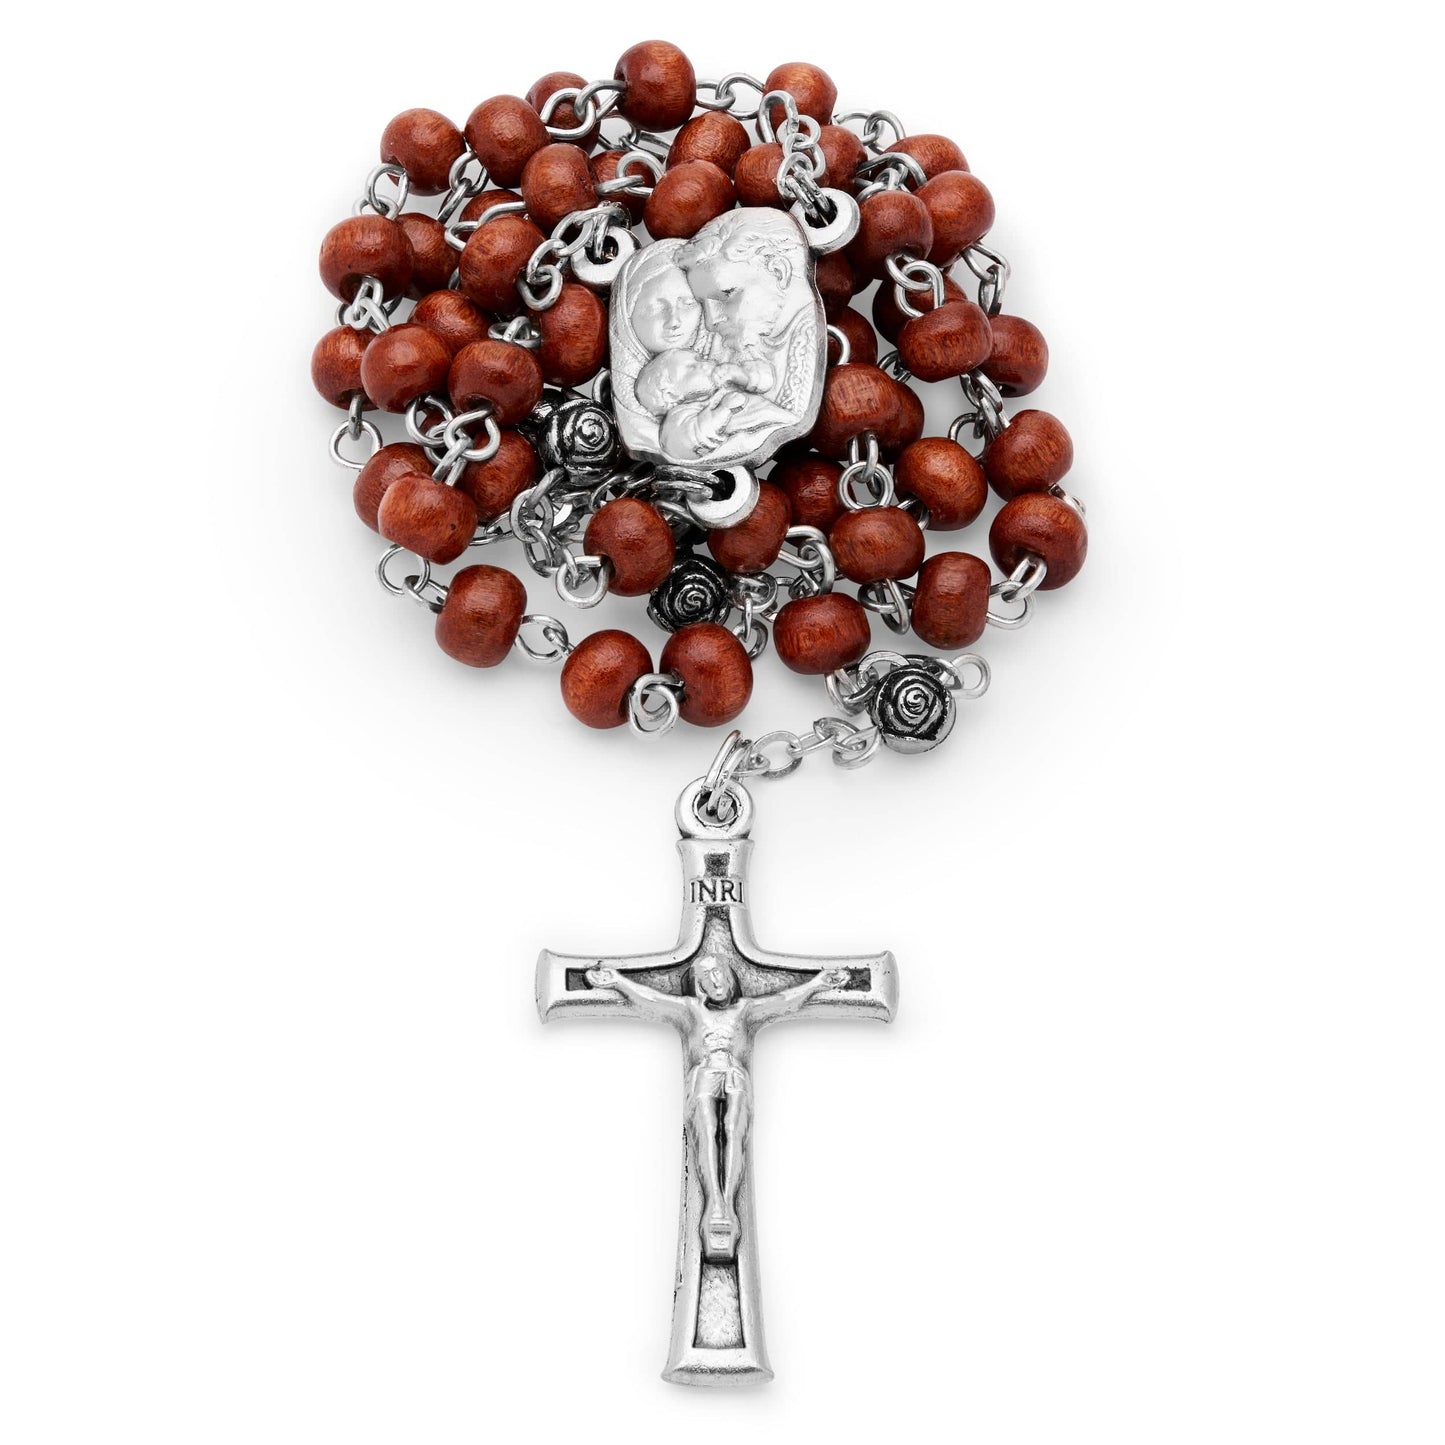 MONDO CATTOLICO Prayer Beads 38 cm (15 in) / 4 mm (0.15 in) Holy Family Keepsake Wooden Case and Rosary